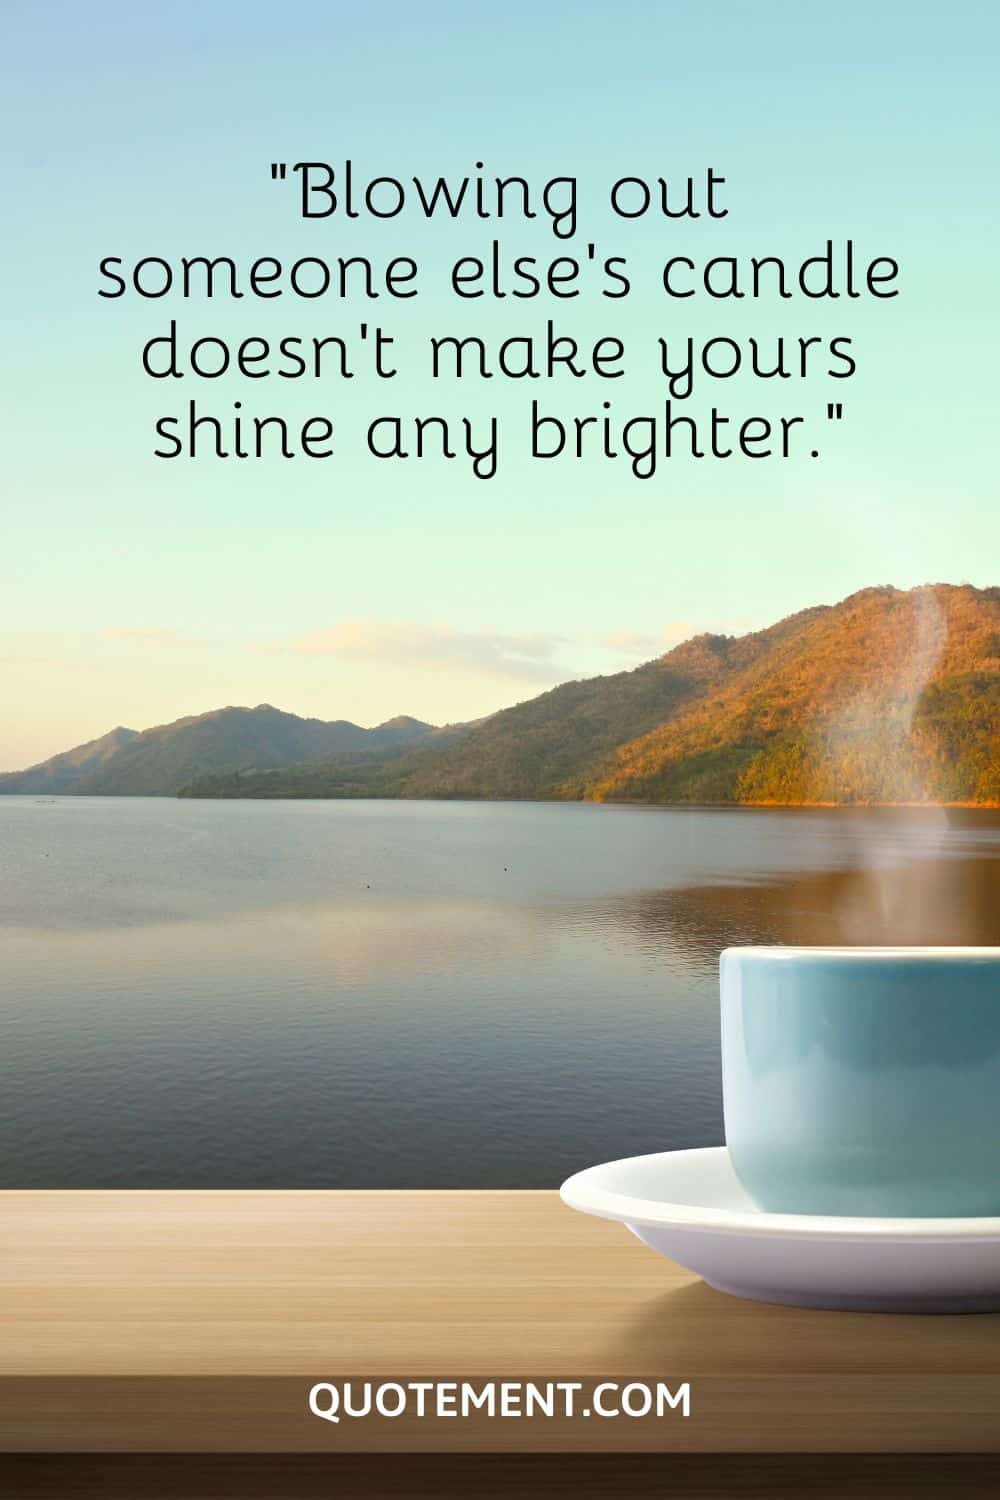 Blowing out someone else’s candle doesn’t make yours shine any brighter.